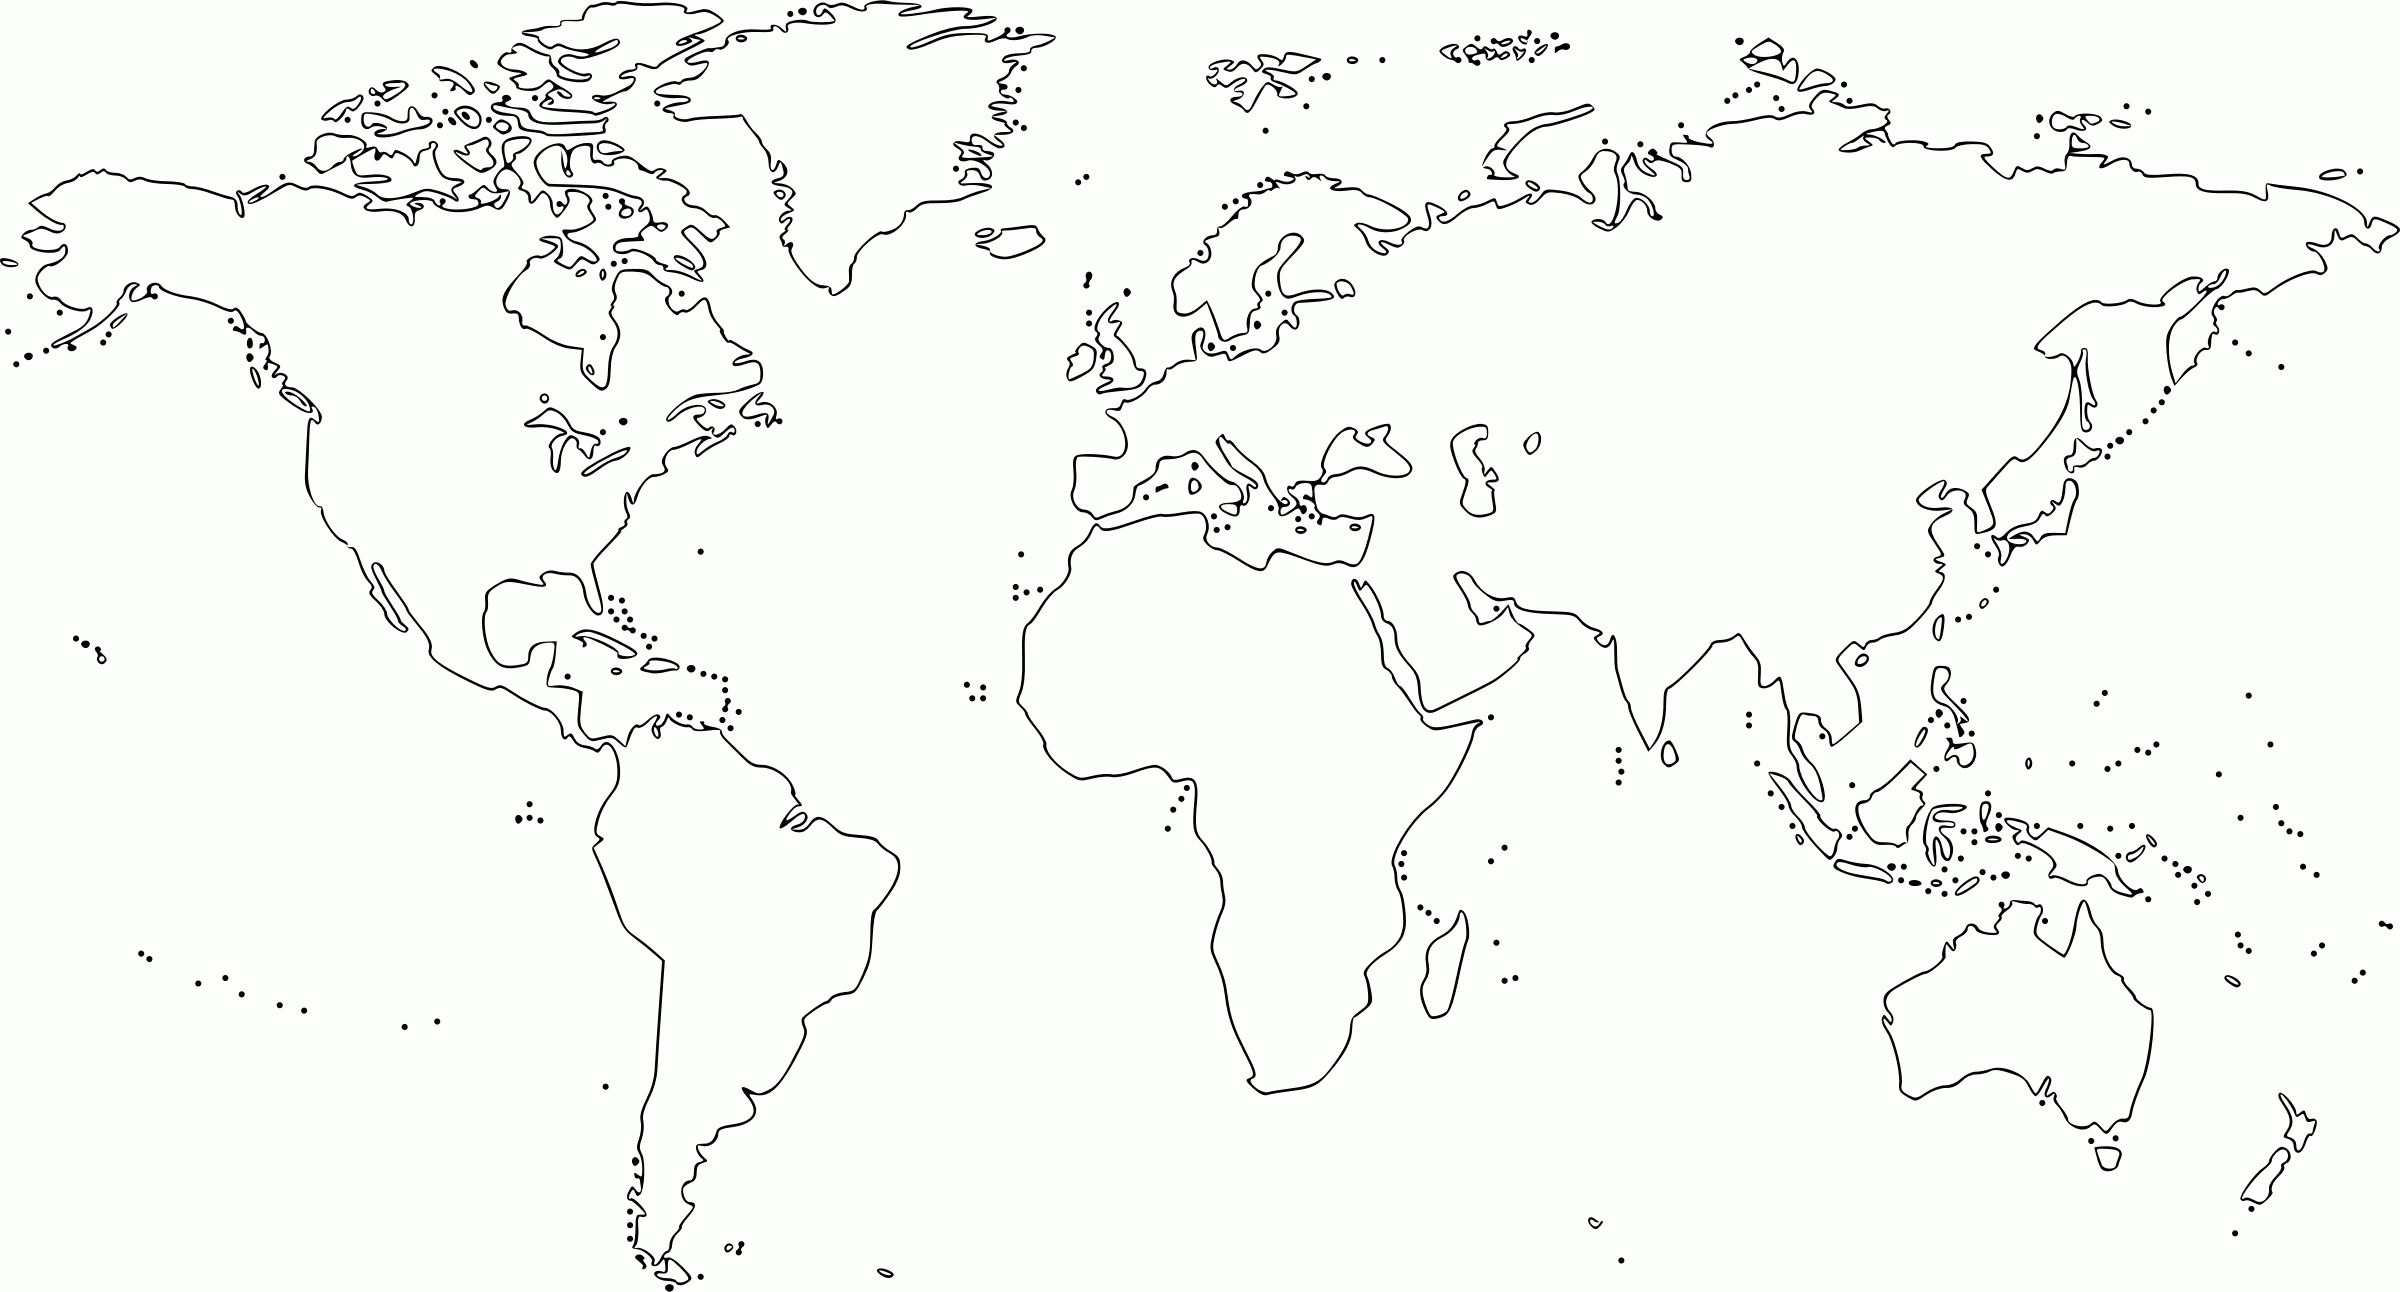 Countries Coloring Pages World Map Coloring Page With Countries Labeled Texas State Map